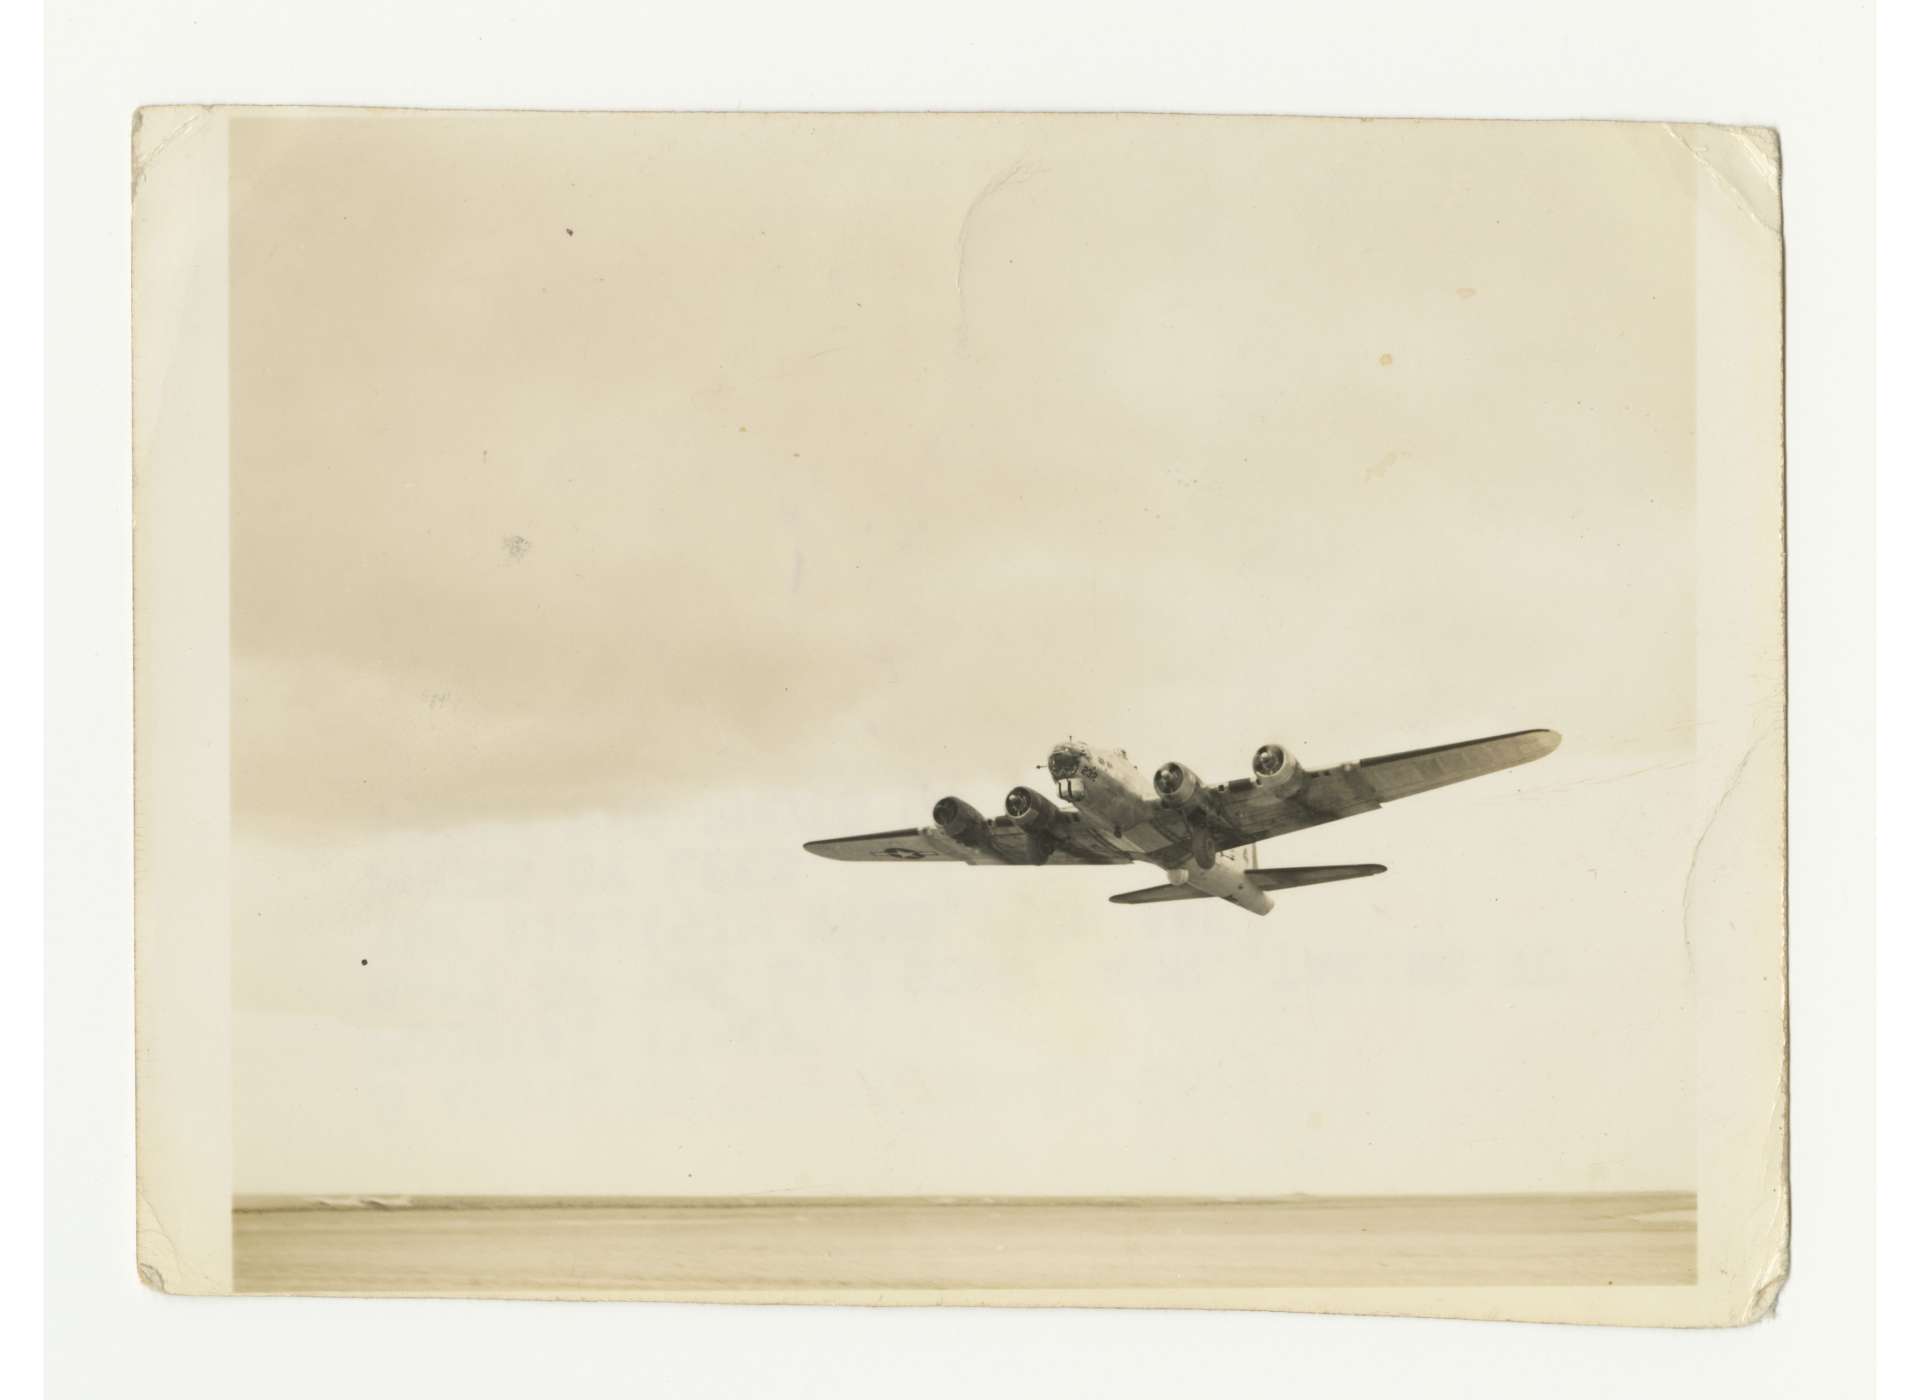 B-17 Flying Fortress of the 419 Bombardment Squadron, 301st Bombardment Group, Fifteenth Air Force, takes off from an airfield near Foggia, April 8, 1945. US Army Signal Corps photo, gift in memory of William F. Caddell, Sr., from the Collection of The National WWII Museum, 2007.048.108.